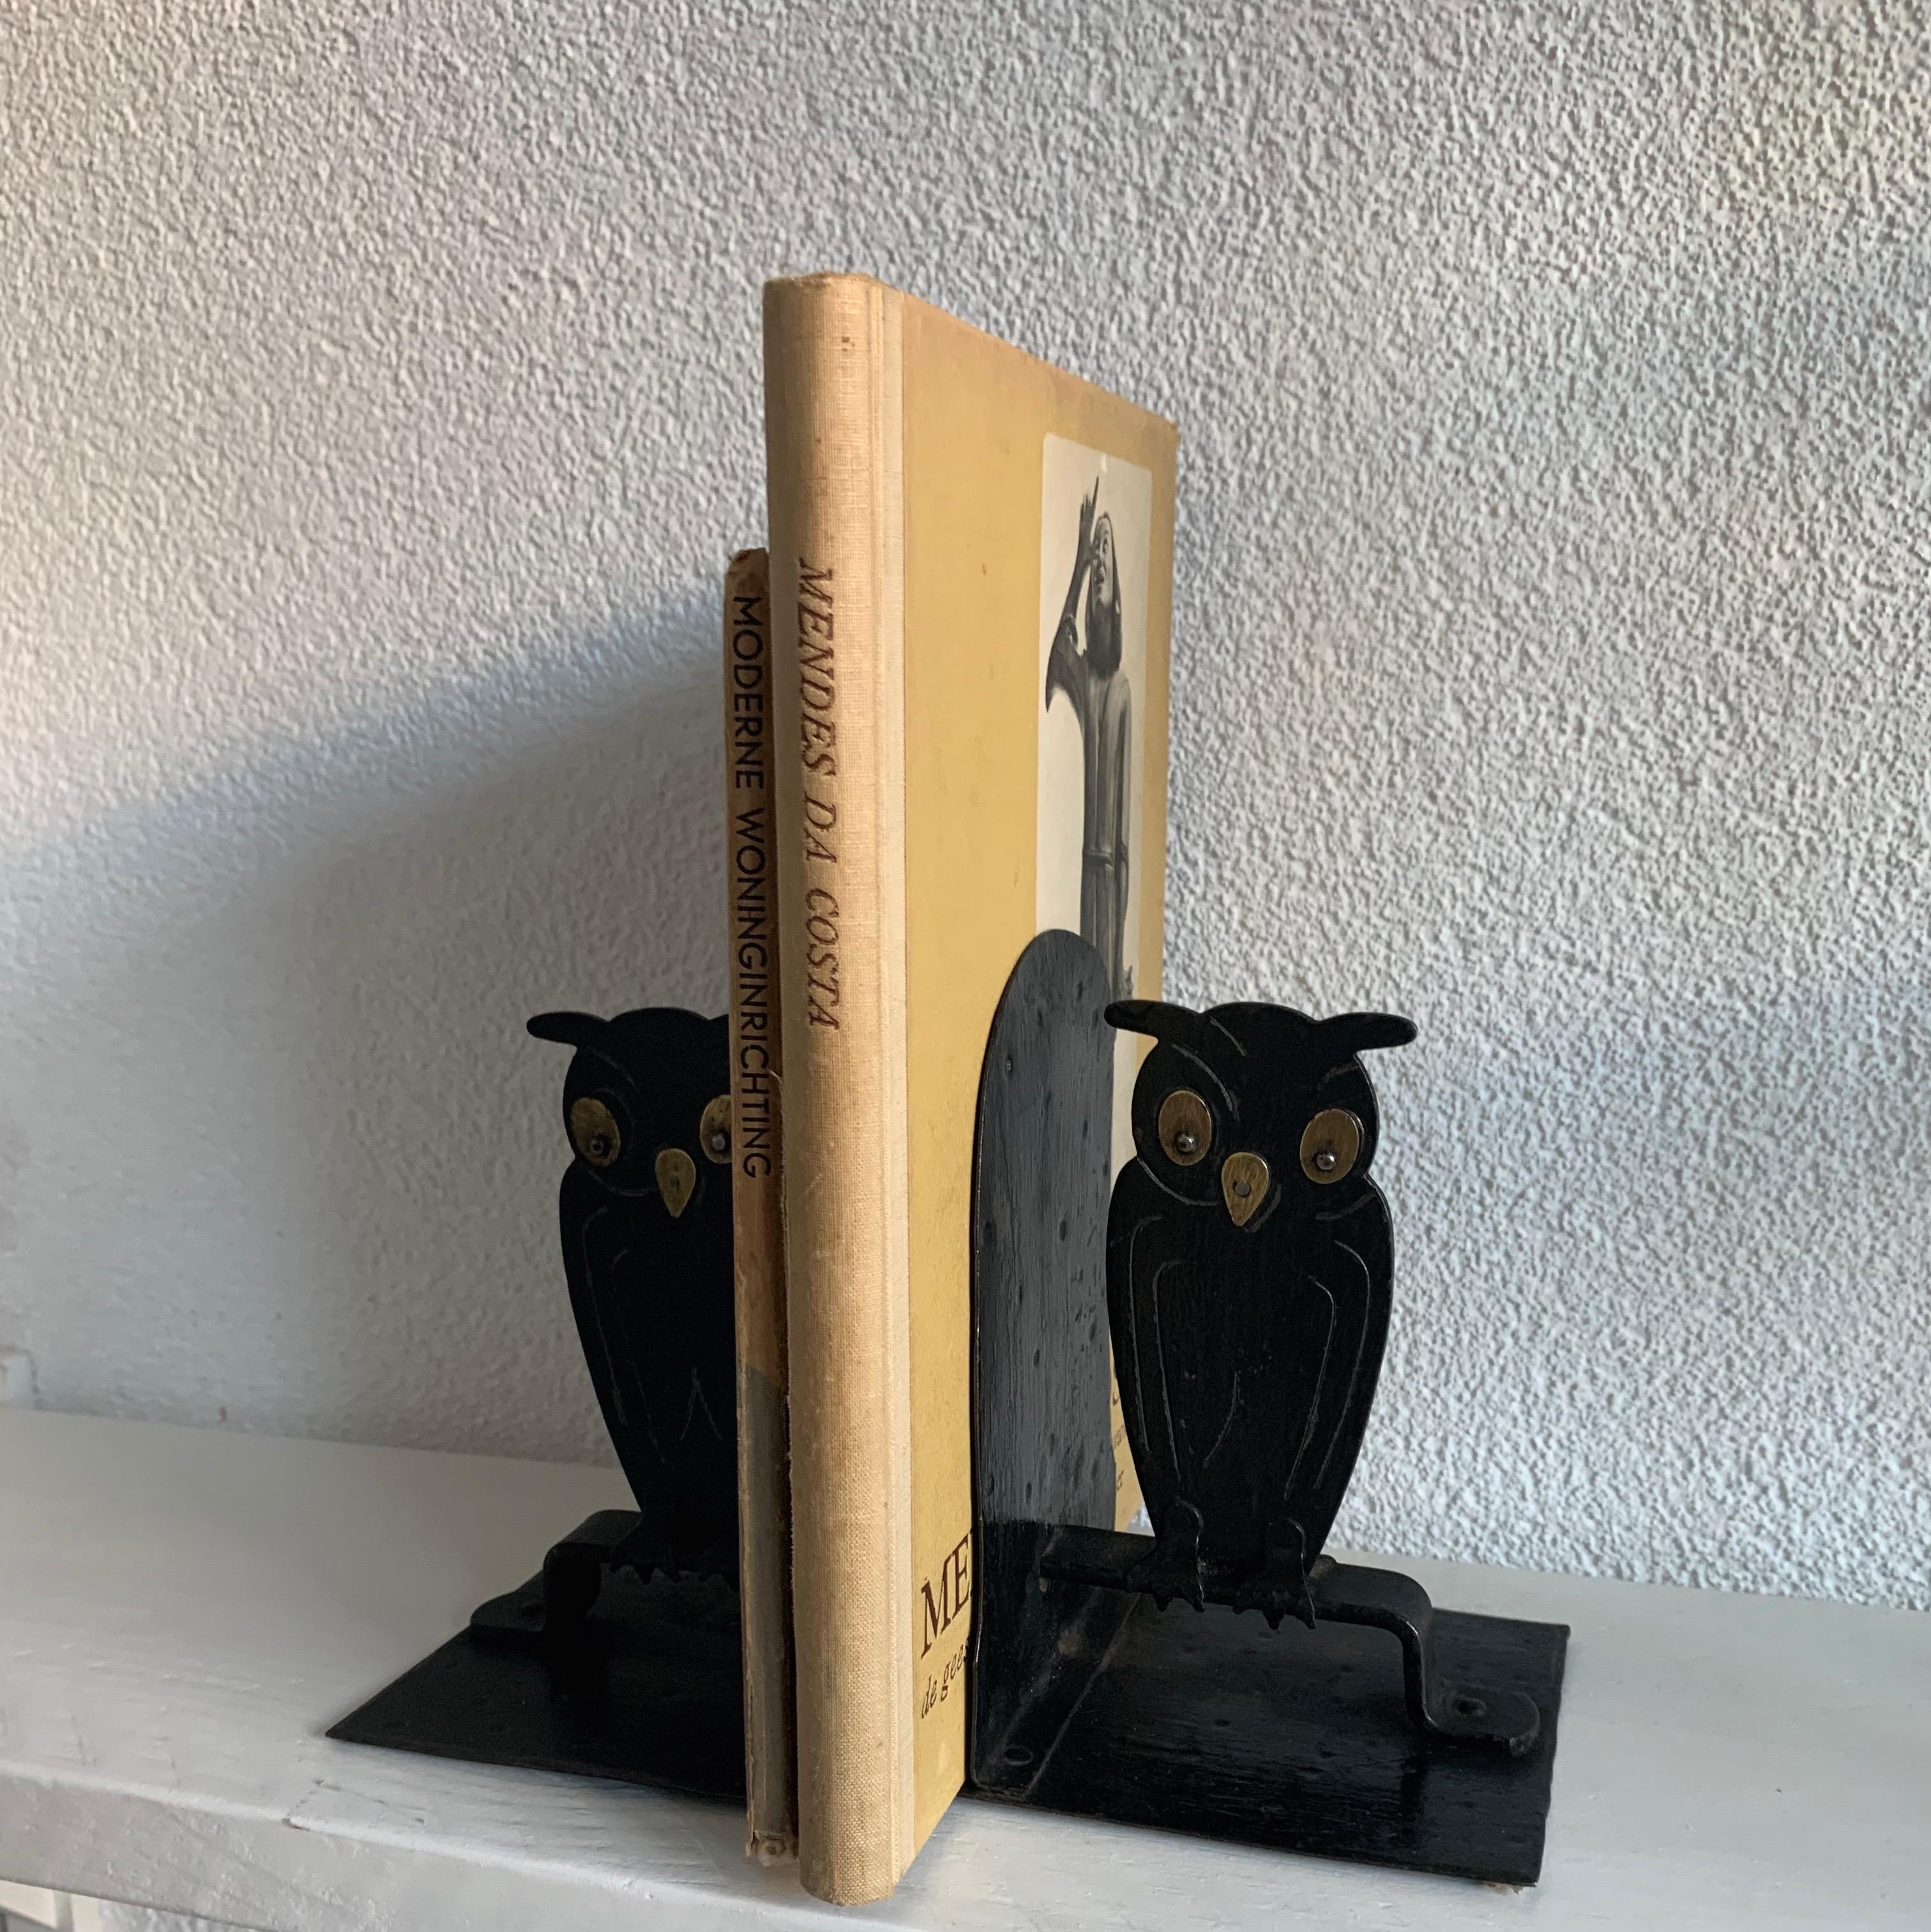 Pair of Hammered Arts & Crafts Blacked Metal Owl Bookends by Goberg, Hugo Berger For Sale 4